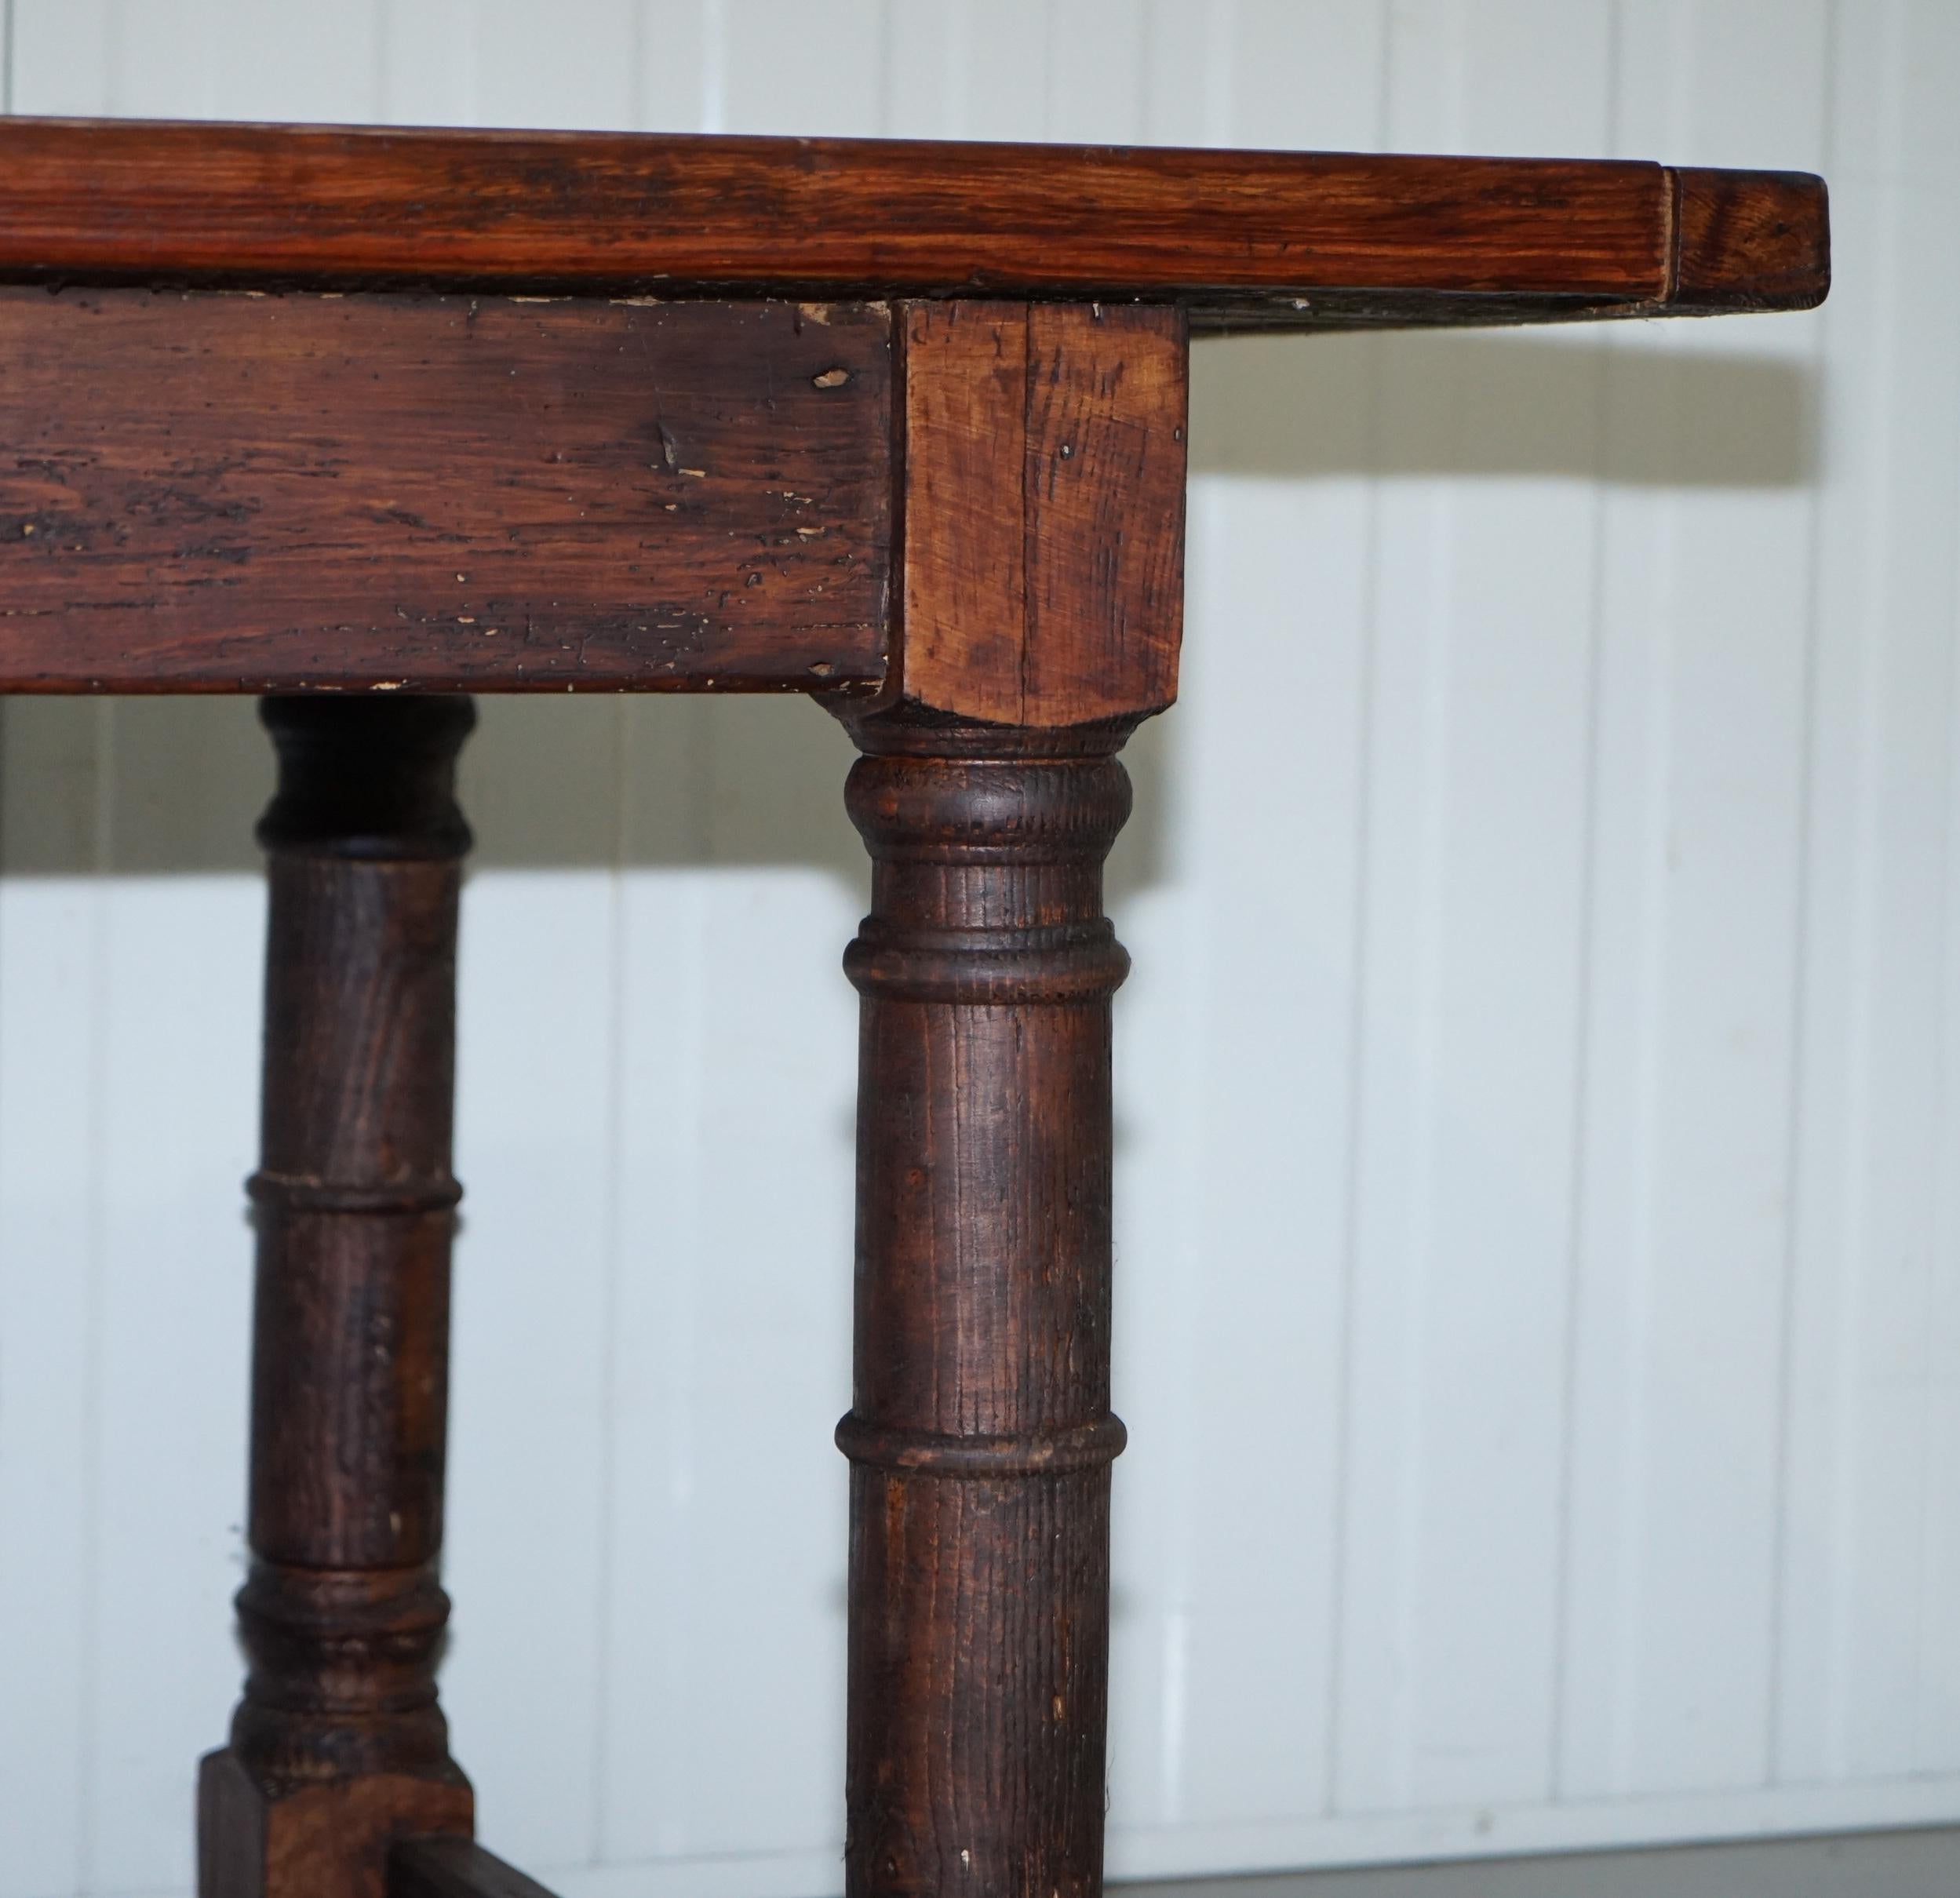 Vintage Timber Planked Top English Farmhouse Refectory Dining Table Seats 8-10 3